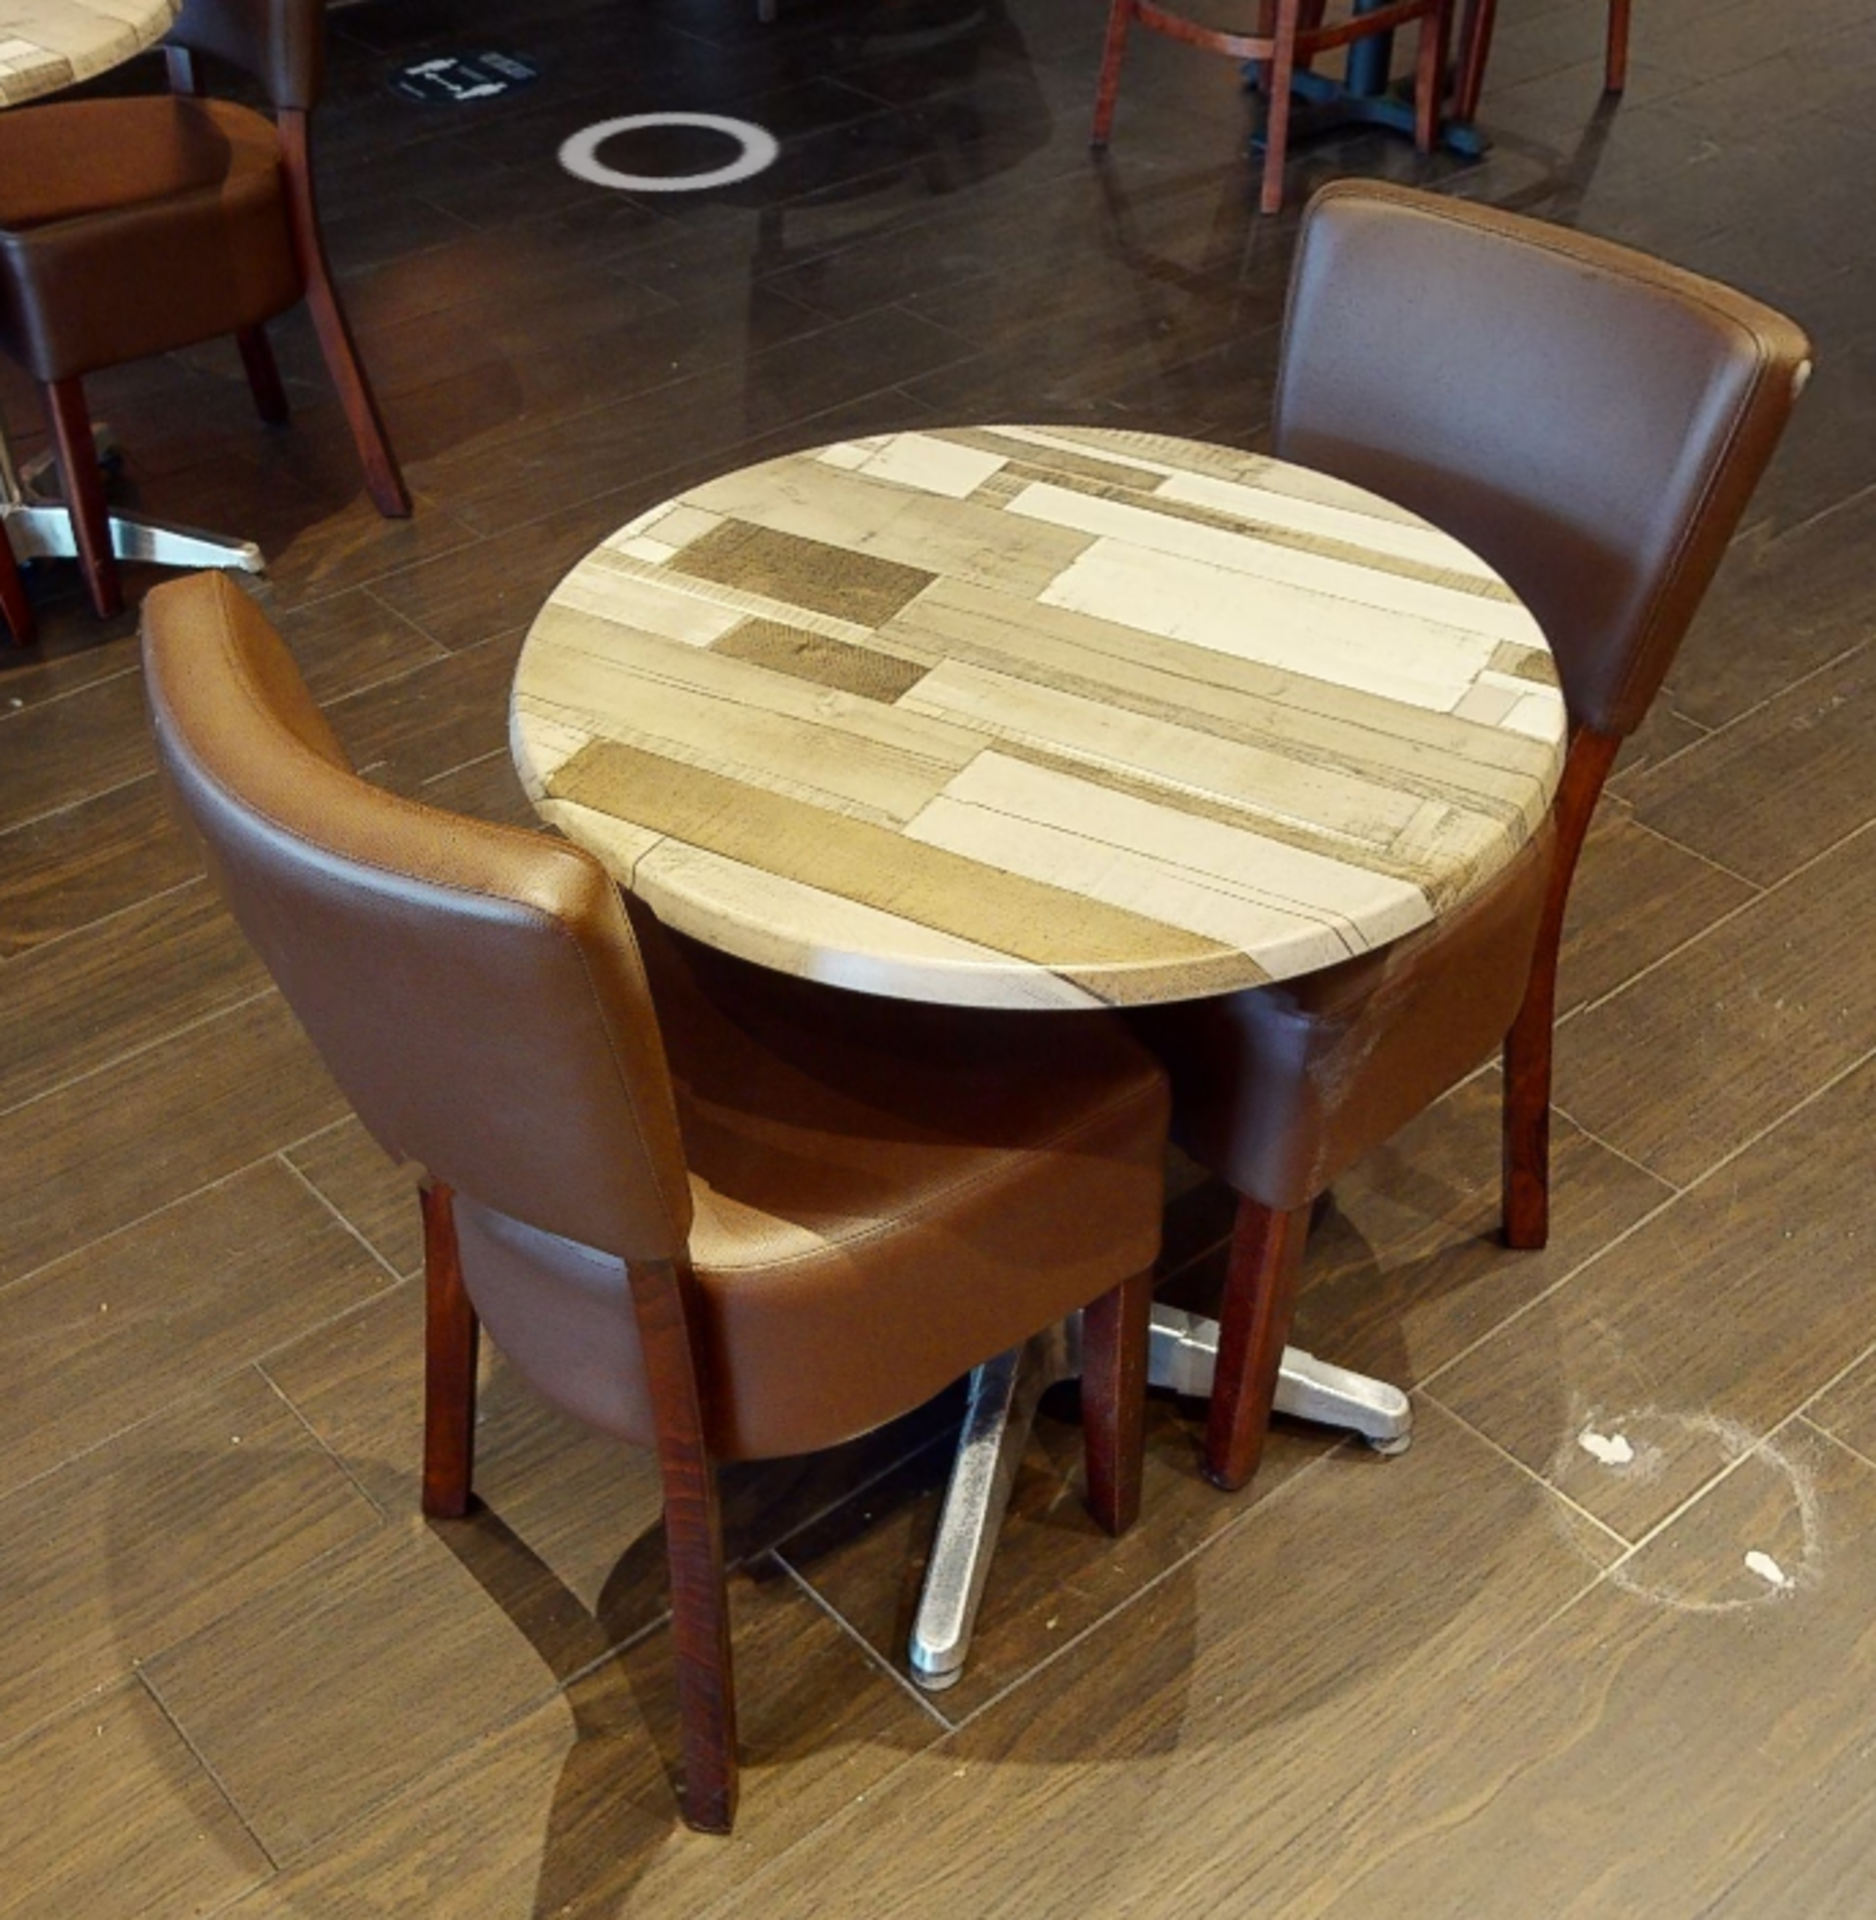 8 x Restaurant Chairs With Brown Leather Seat Pads and Padded Backrests - CL701 - Location: Ashton - Image 9 of 9